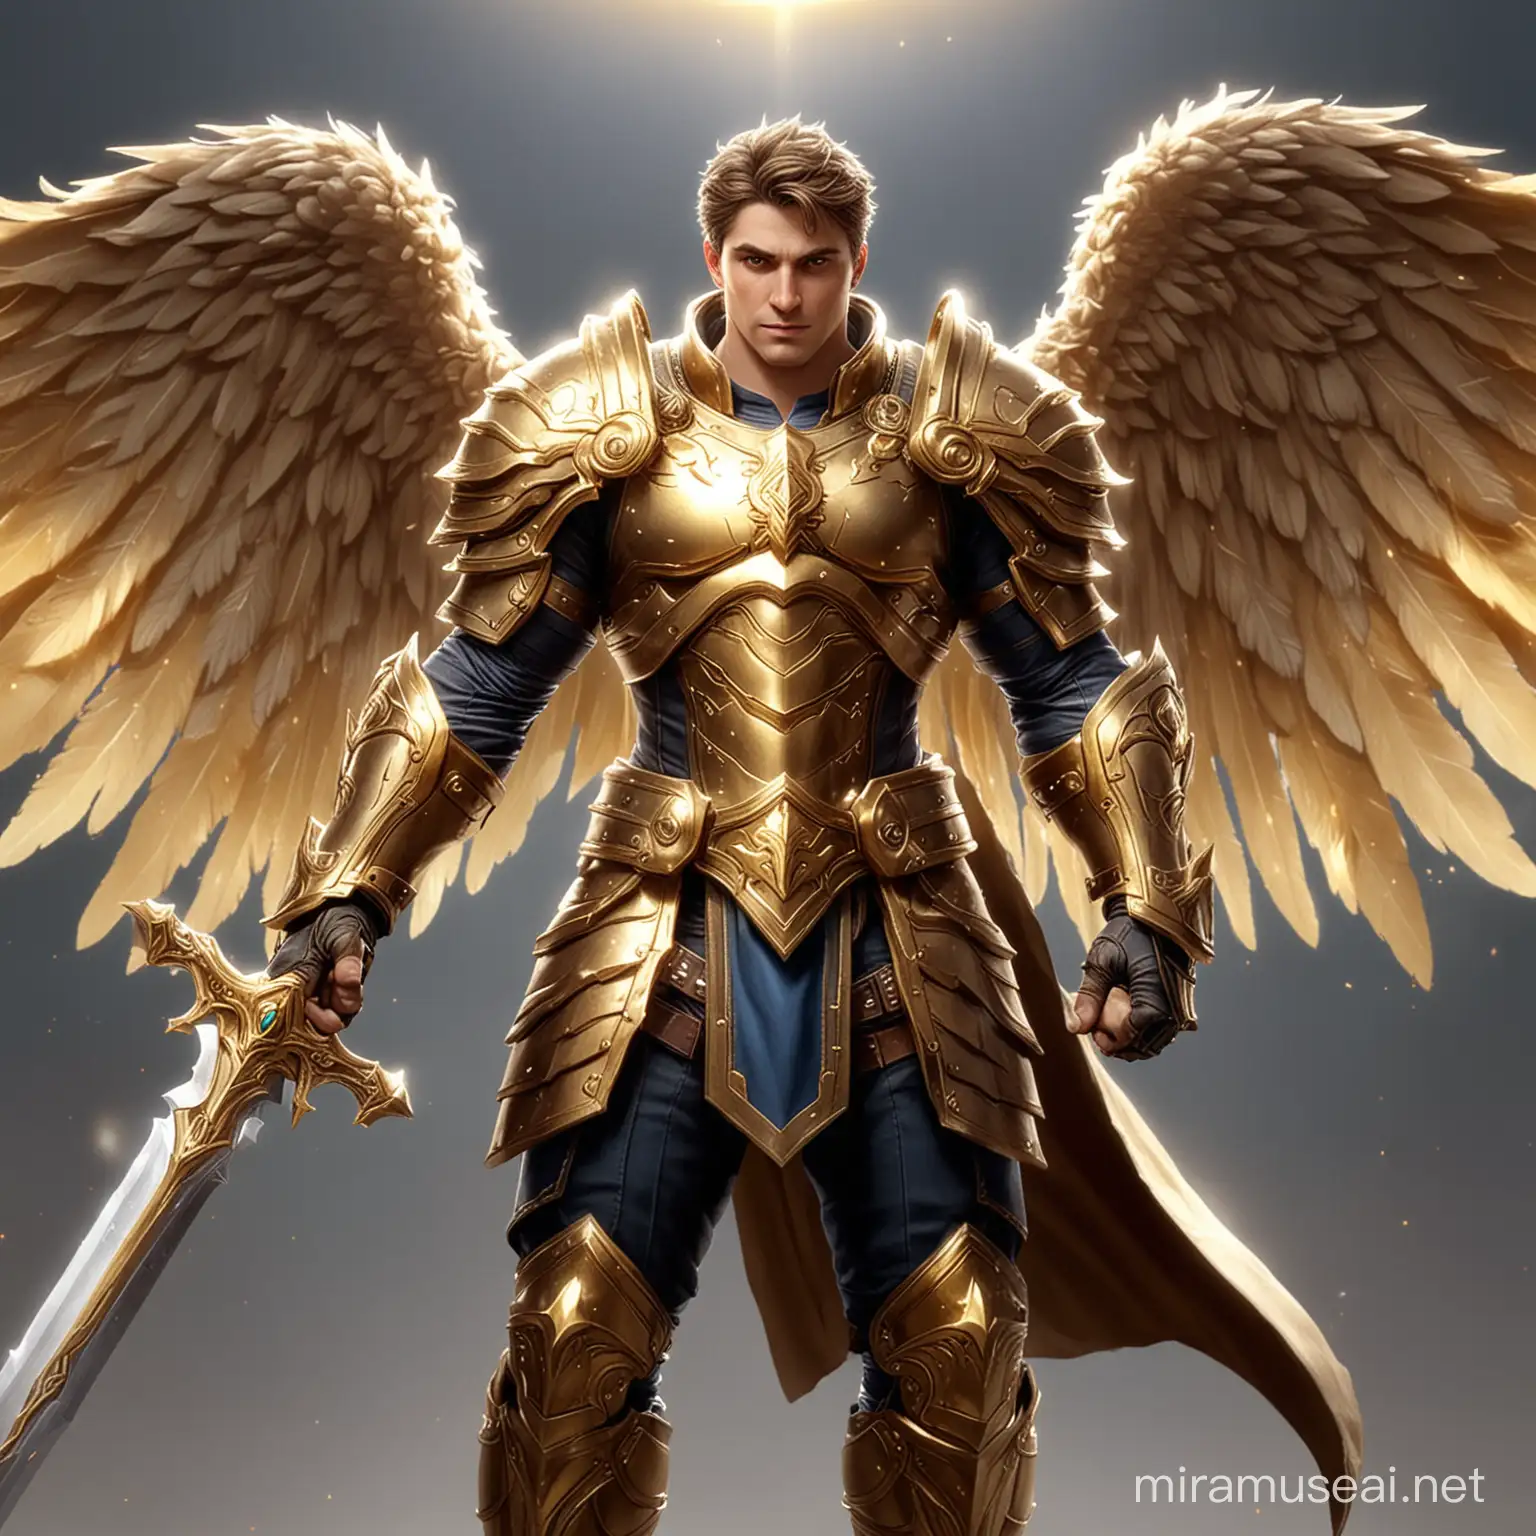 show me garen from league of legends with his full body showing
he has golden angel like wings
and an aura above his head
make him have short curly light brown hair
he is wearing a holy plate armor like paladins from world of warcraft universe
he has a sword
